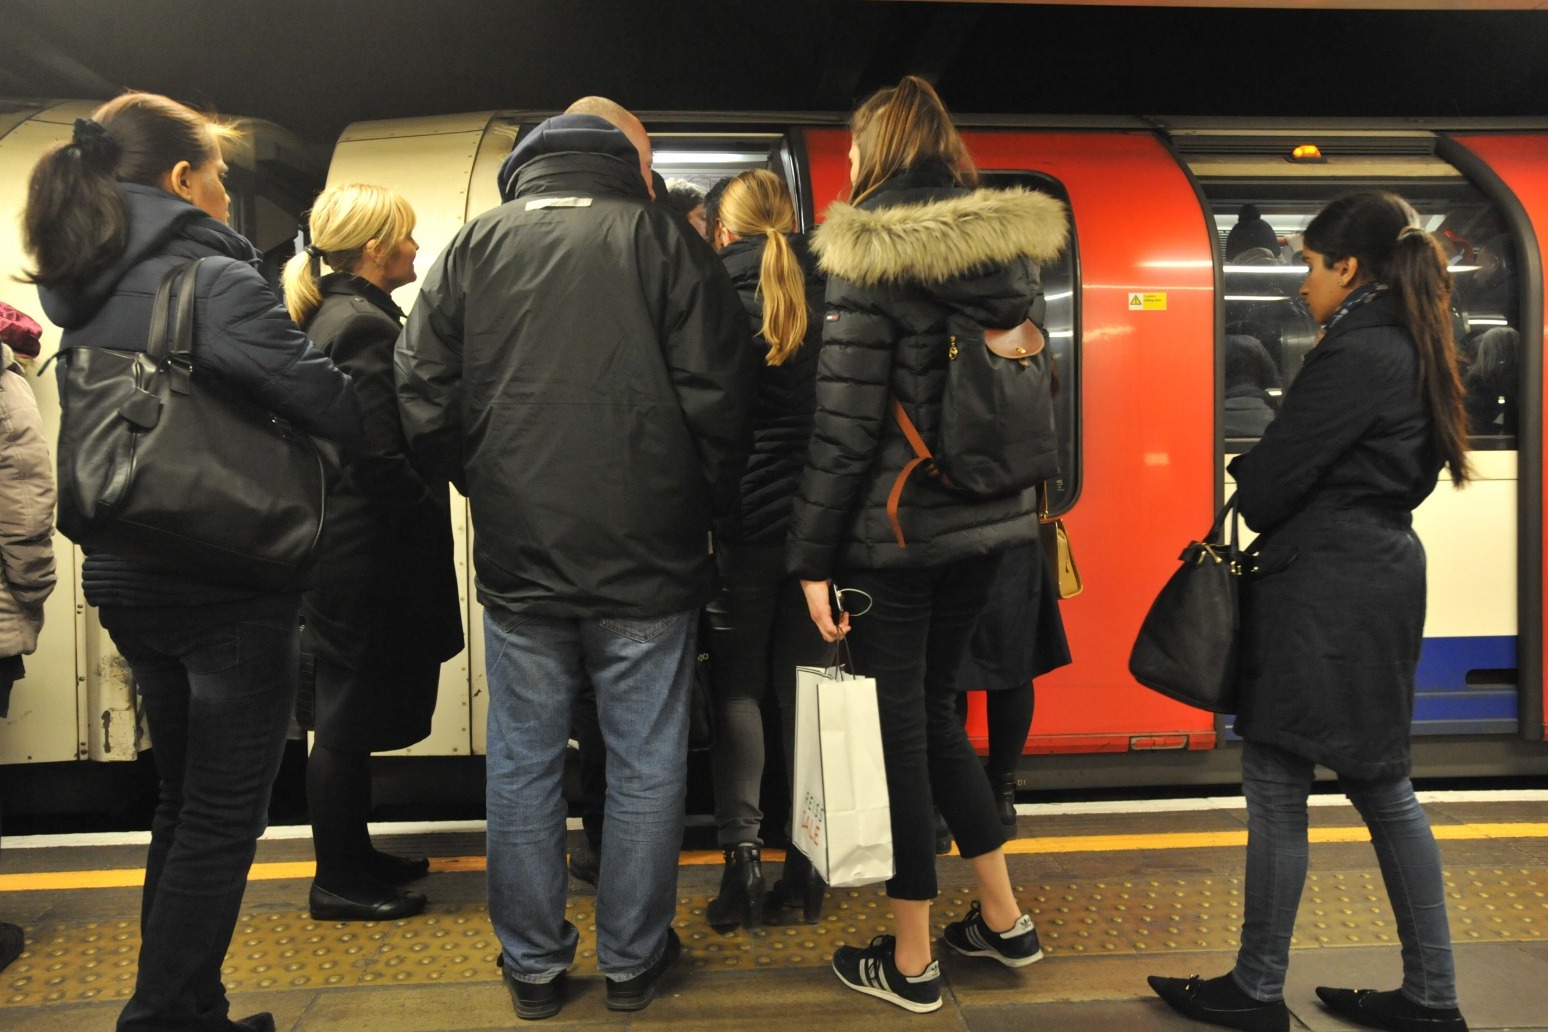 Police say more than a third of women sexually harassed on train and Tube journeys 